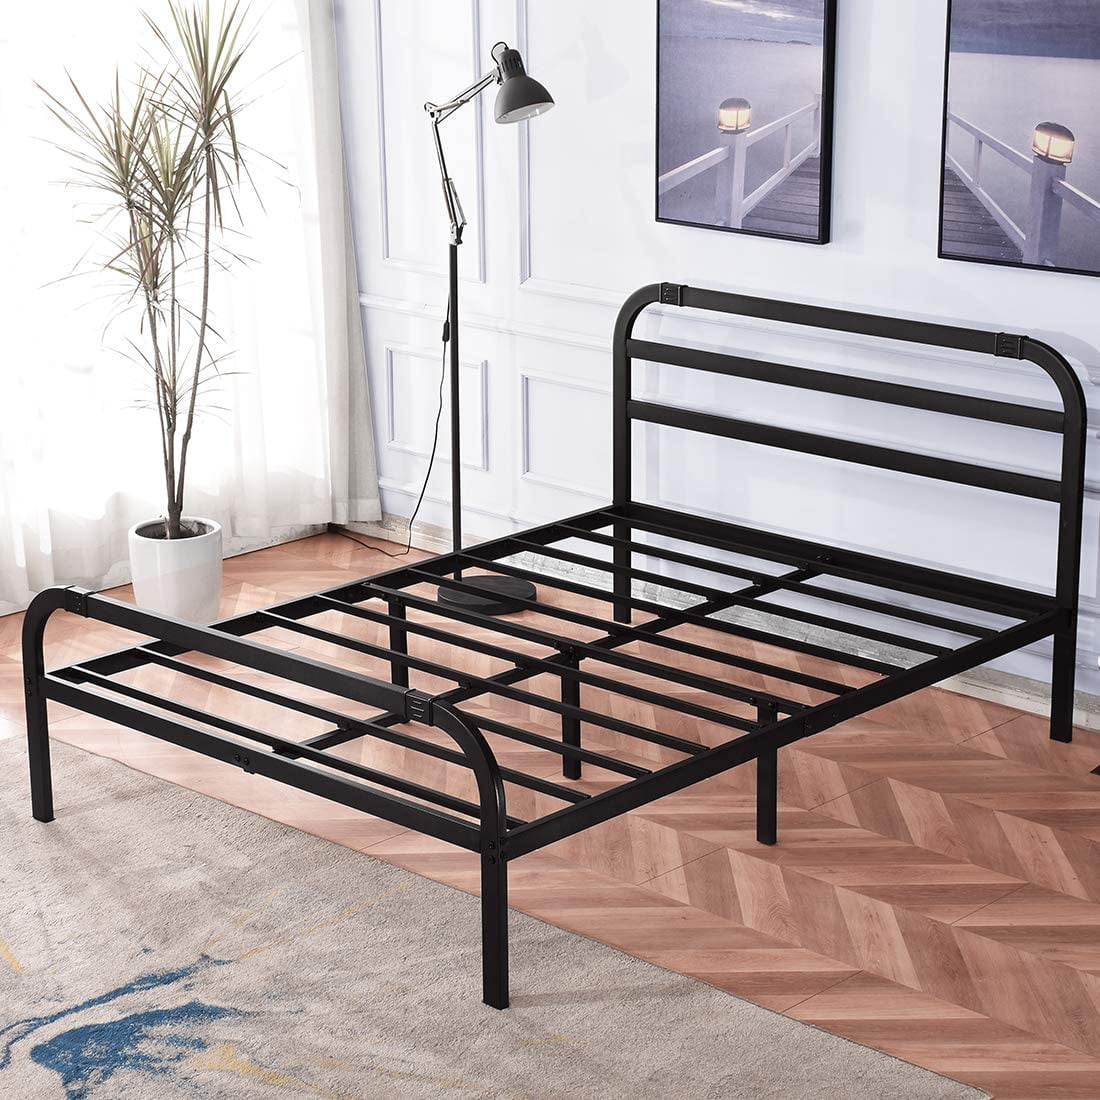 Tatago 14 King Size Bed Frame With, King Size Bed Frame Extra Support